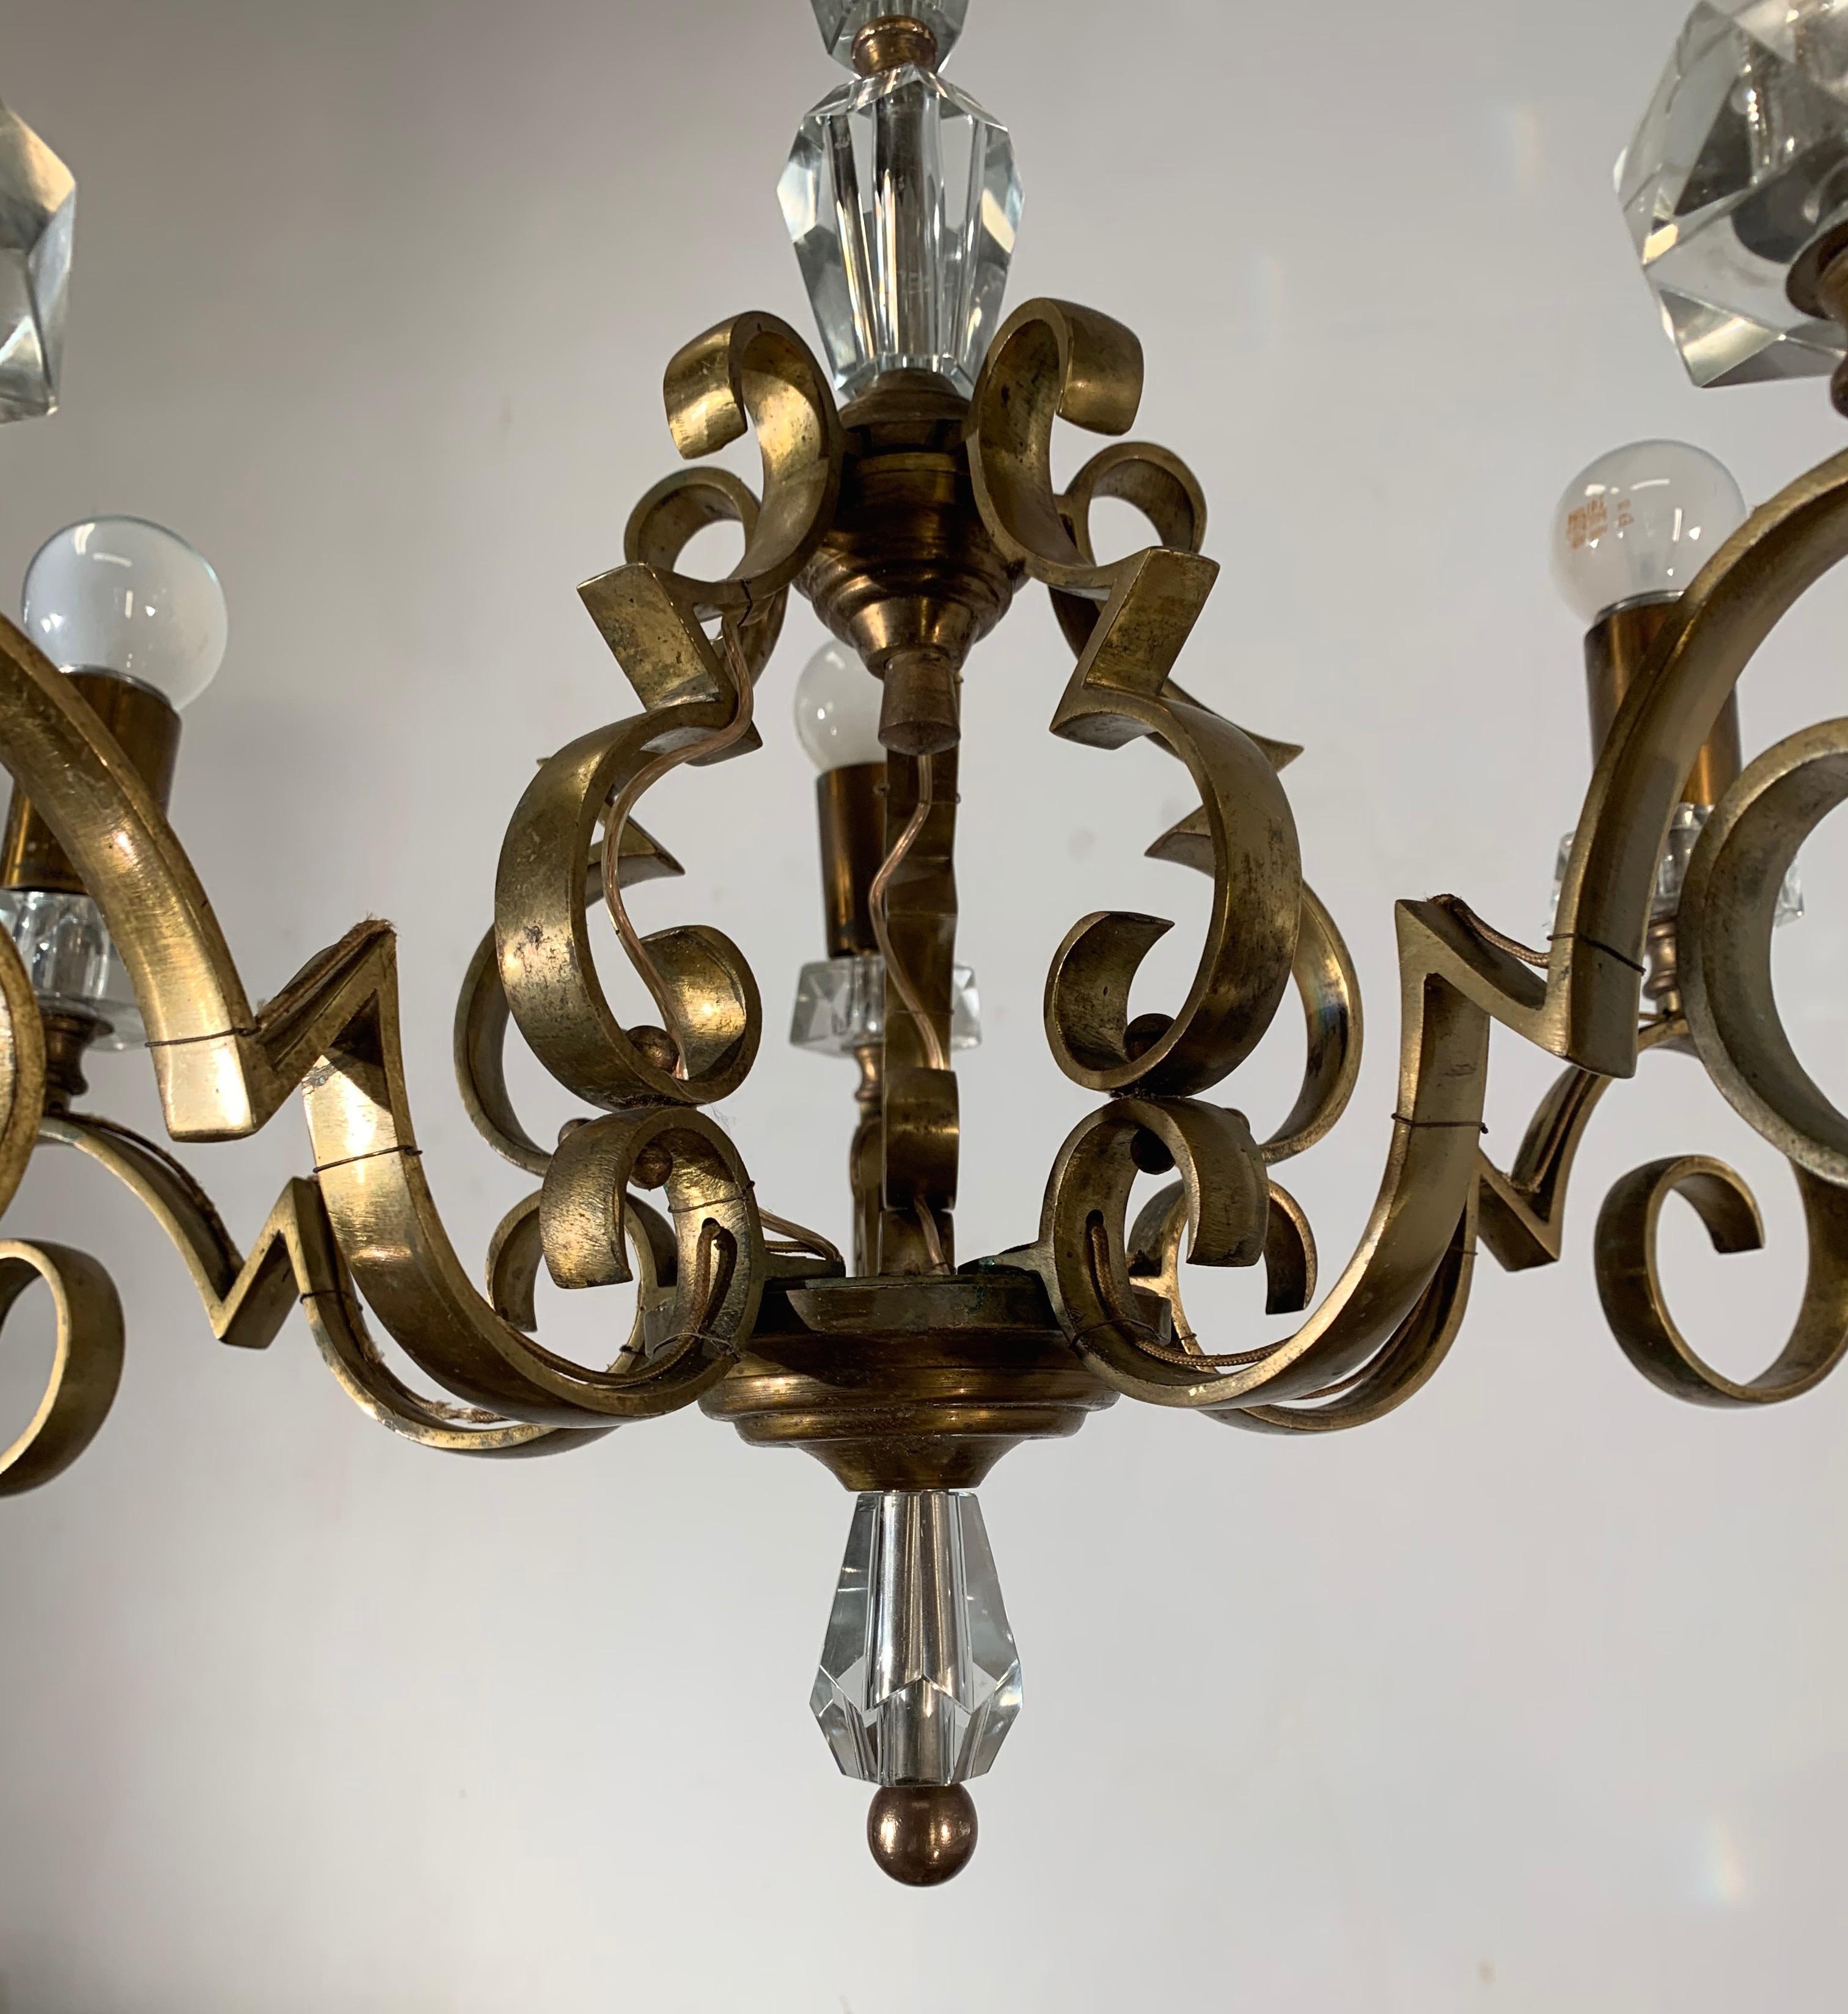 Rare and Handcrafted Jule Leleu Style 5 Light Bronze & Glass Art Deco Chandelier For Sale 12